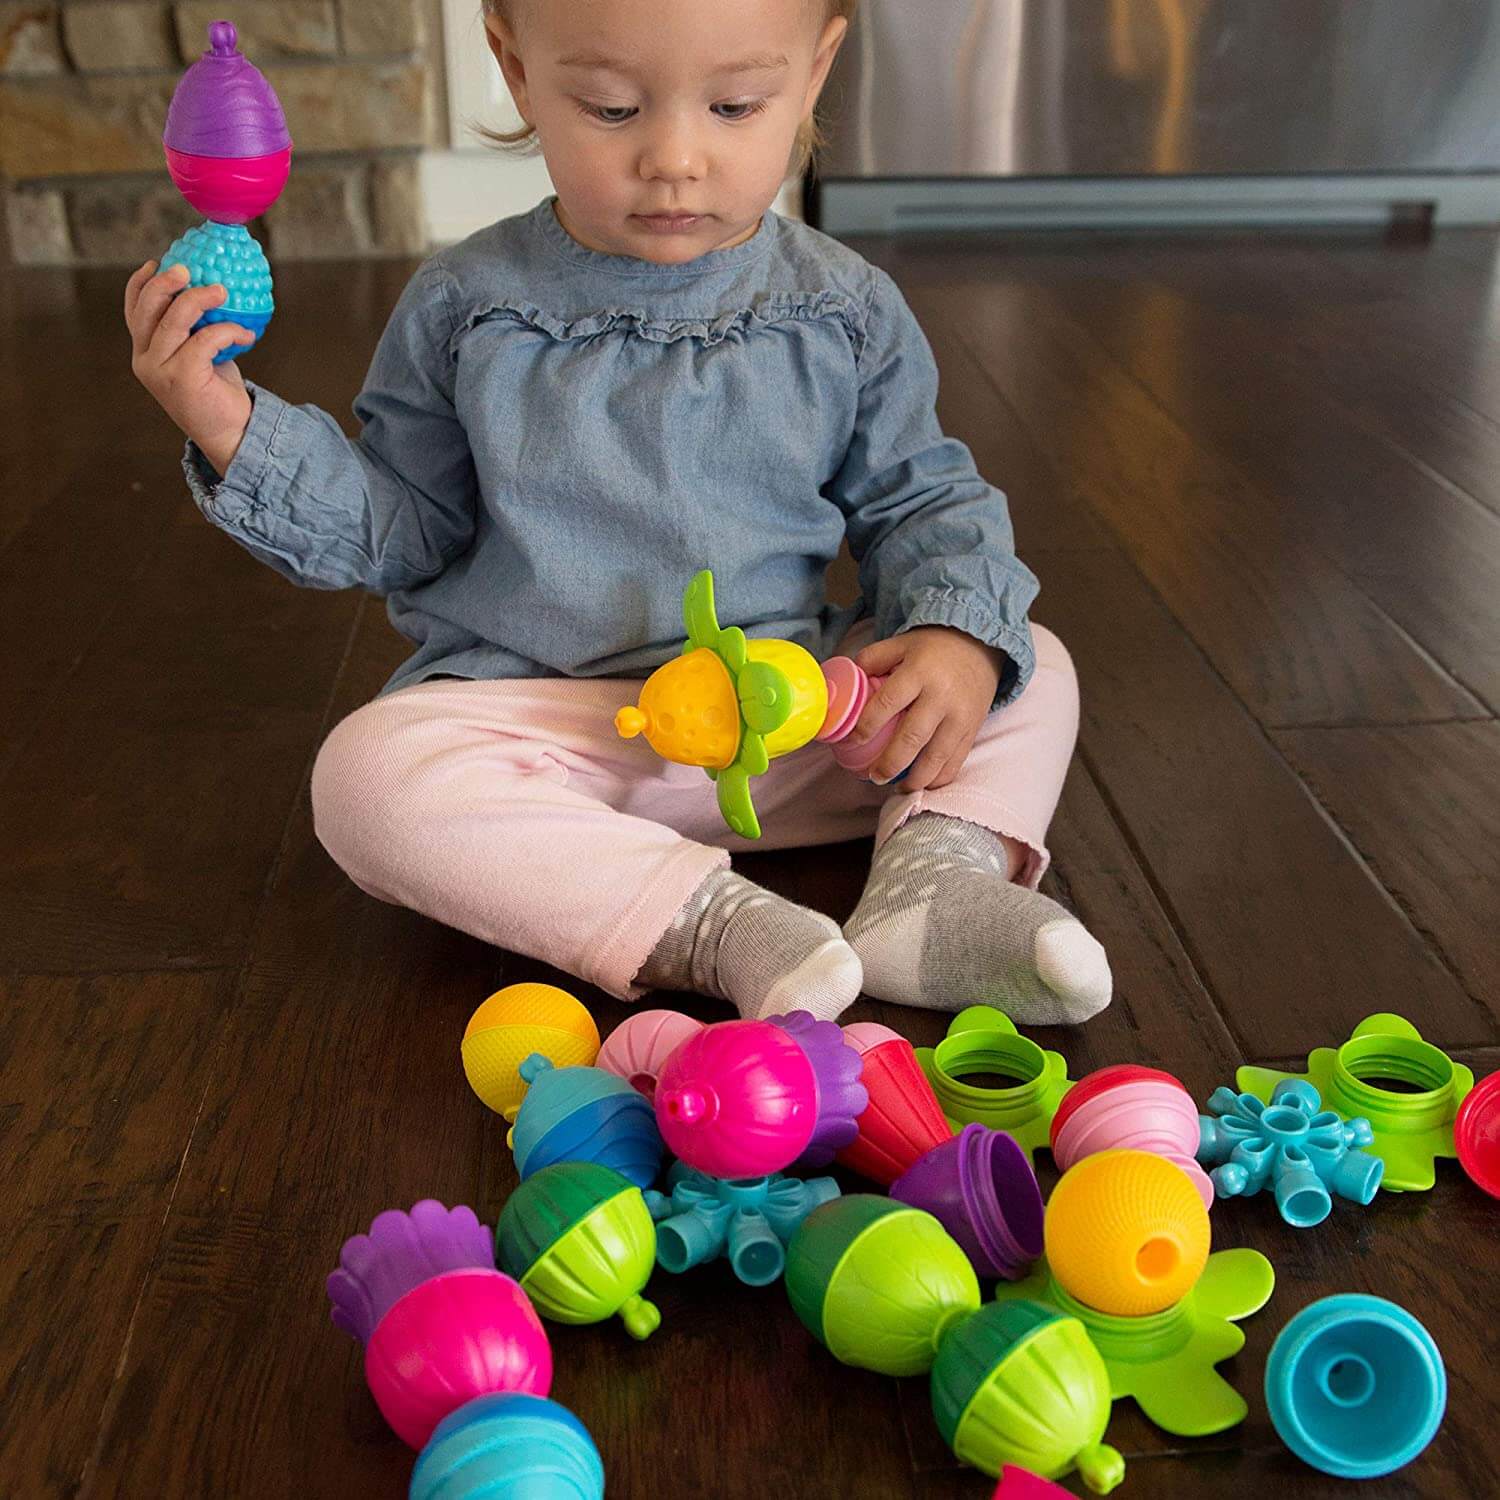 Baby playing with the pieces of the toy.